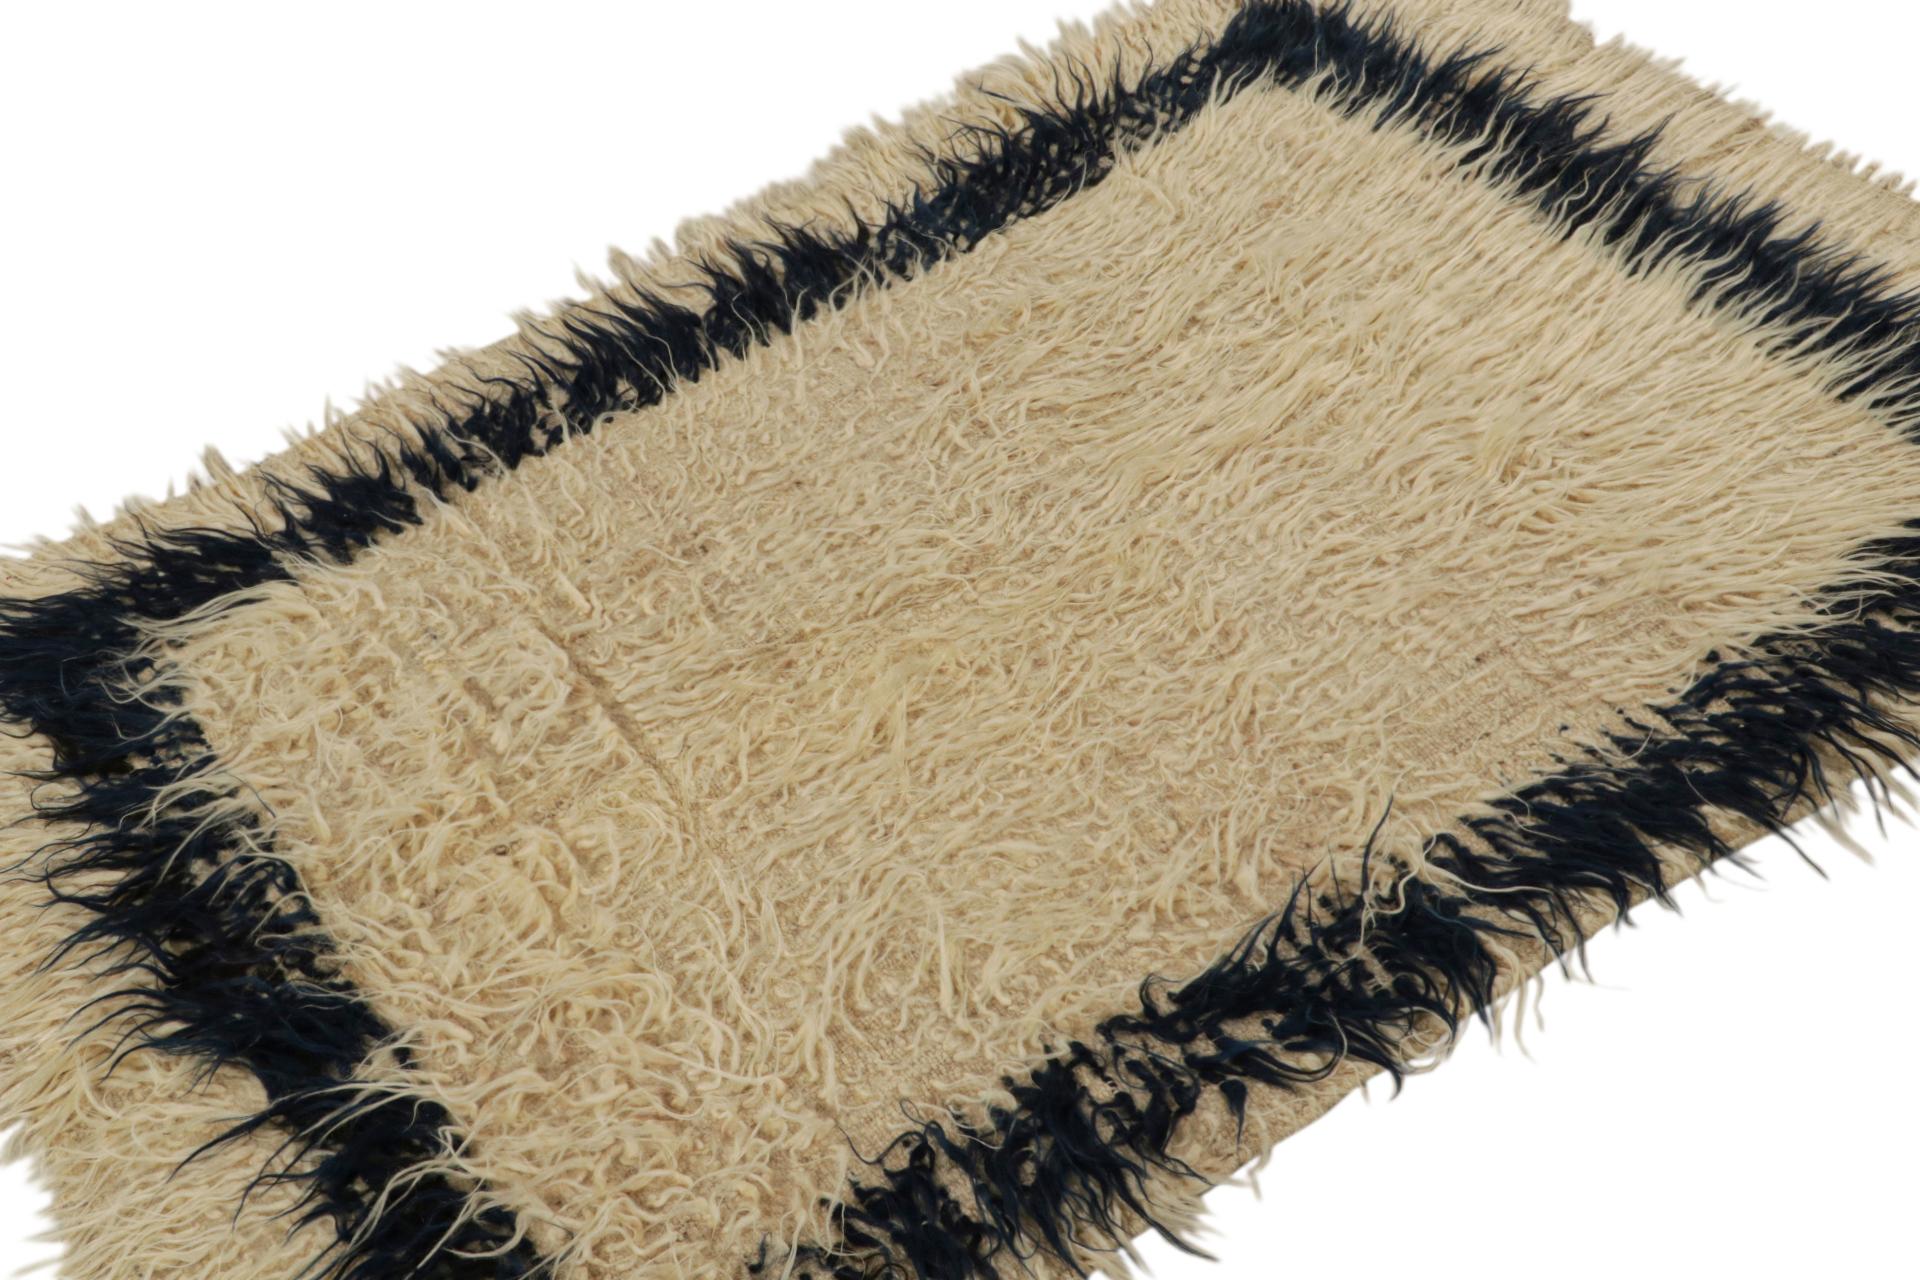 Hand-knotted in wool, this 4x6 vintage Tulu shag rug, circa 1950-1960, is among the family of Tulus with minimalist geometric patterns, as seen in the rich beige neutral tones  

On the Design: 

Tulus are some of the most sought-after high-pile and